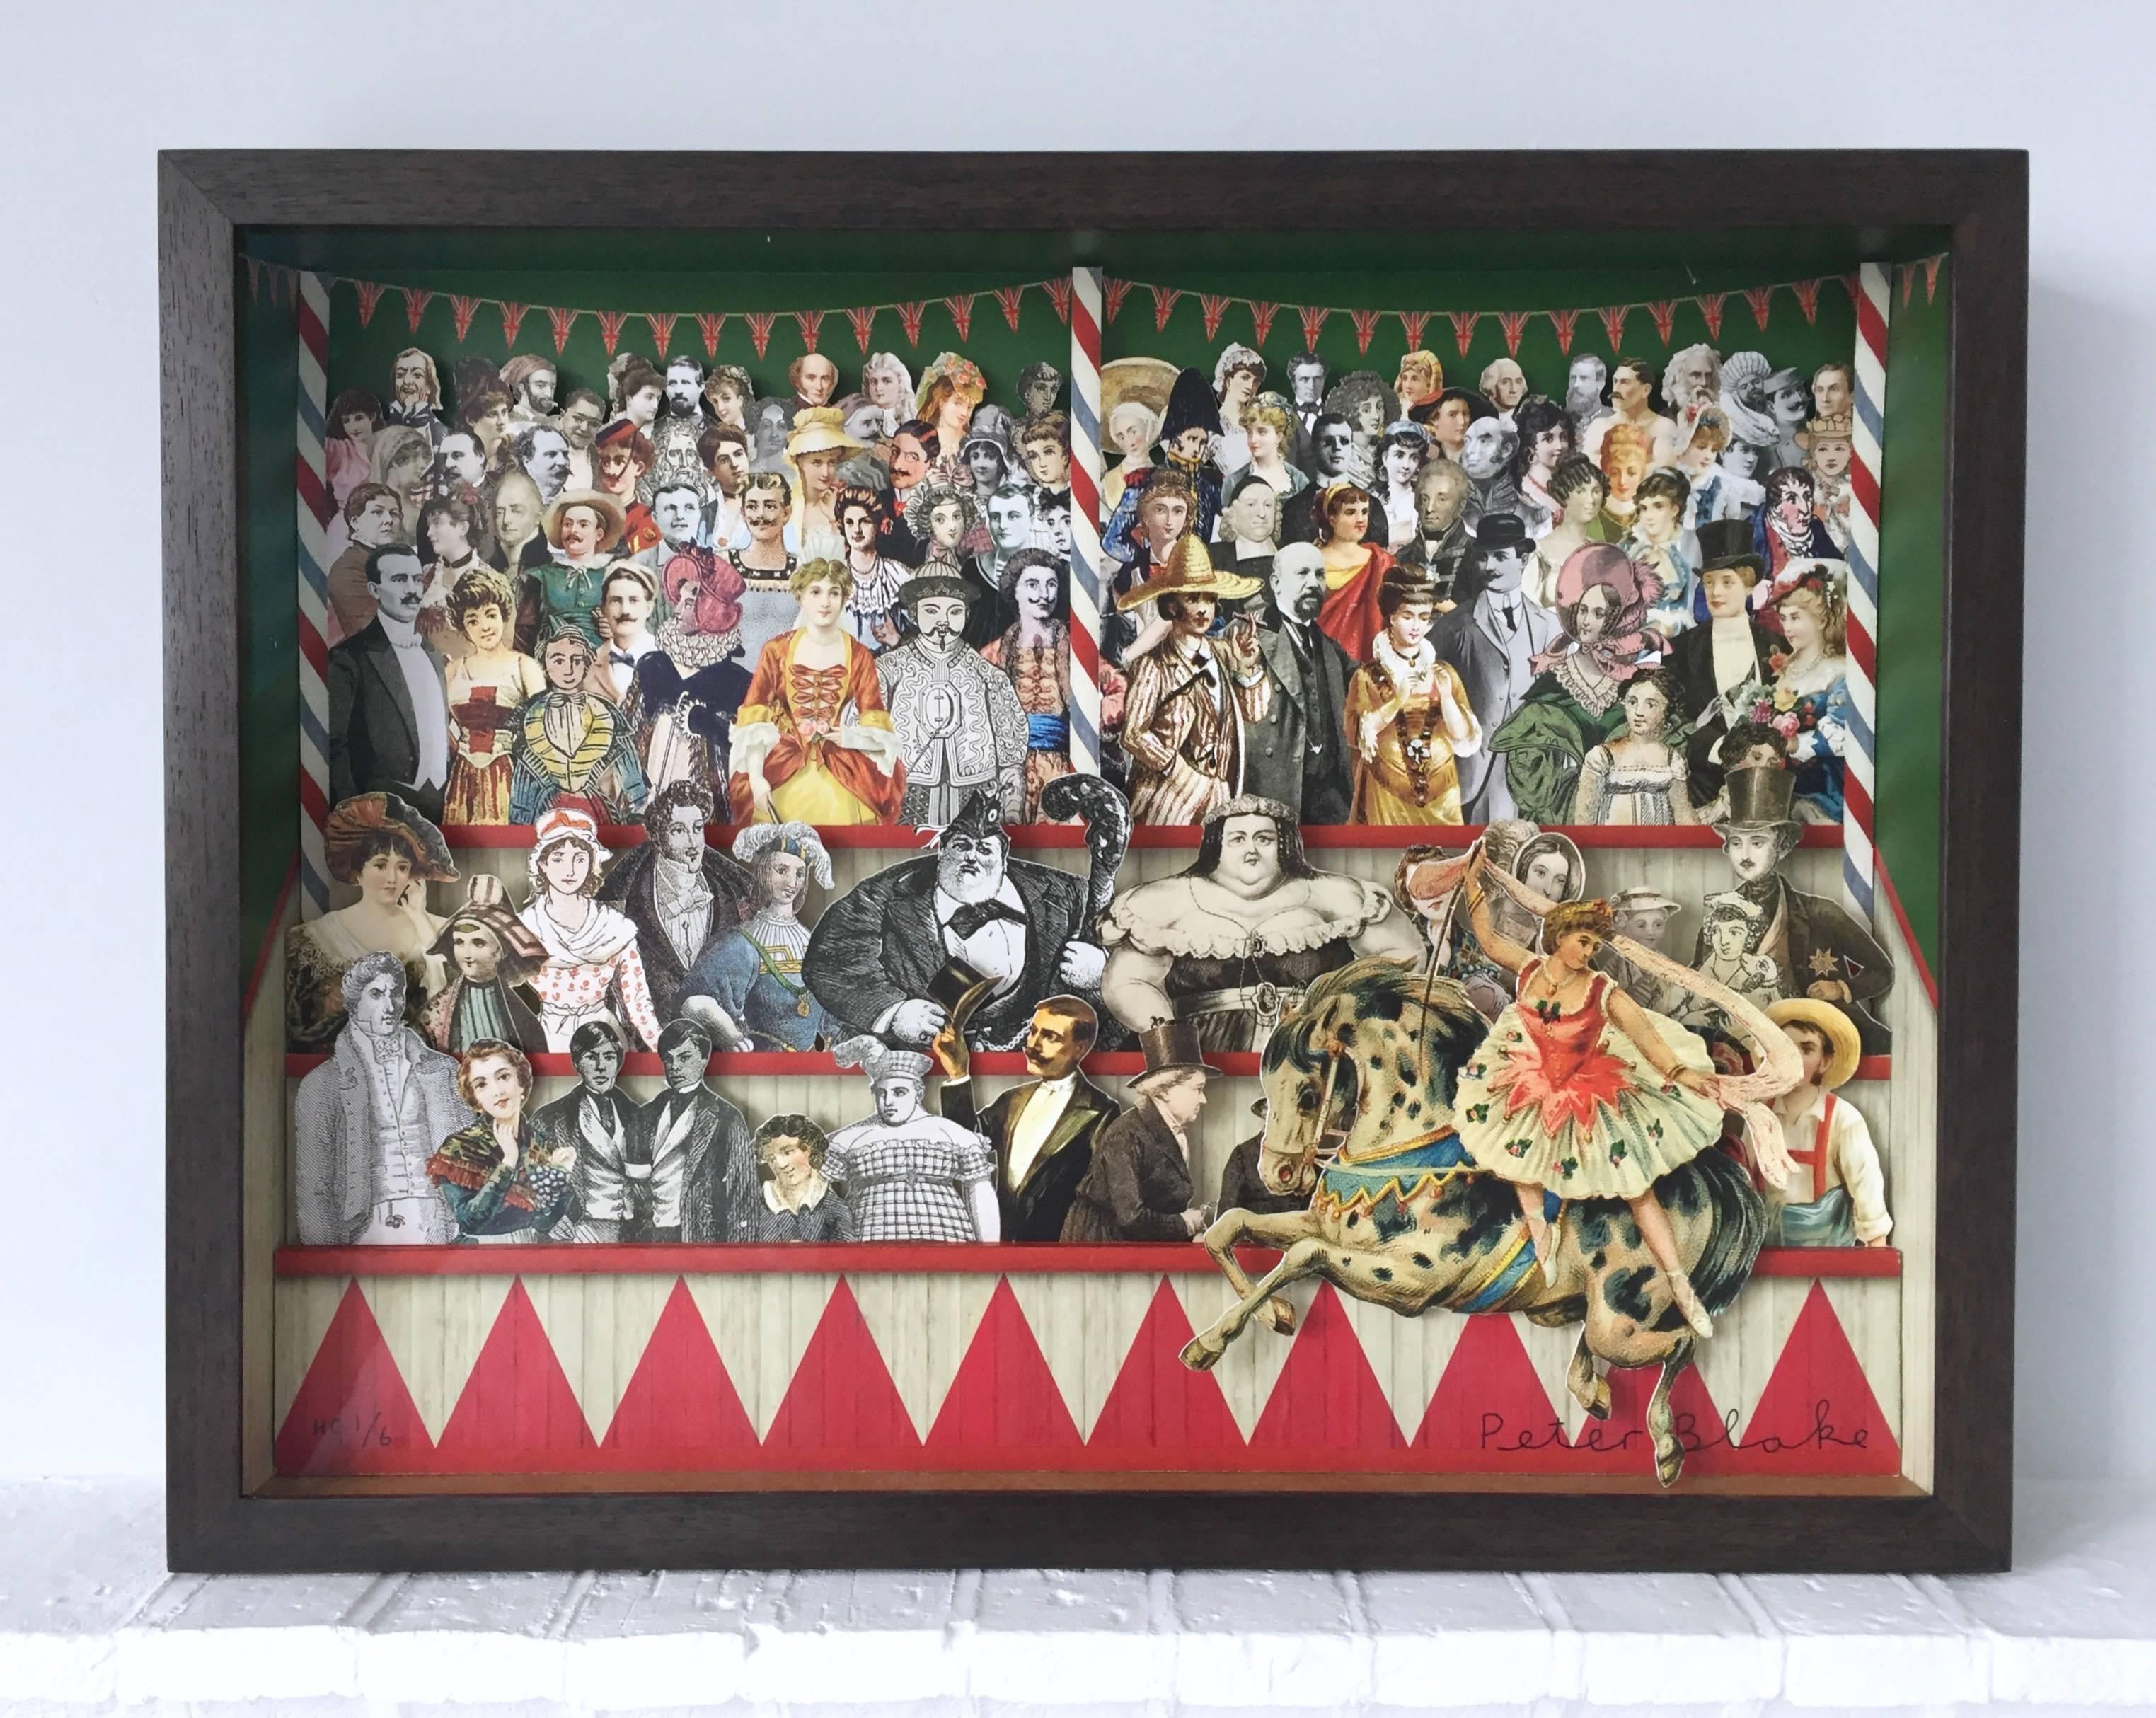 In the 3D Circus works, Peter Blake has combined his love of the circus with his characteristic collaged crowds in a 3 dimensional format. The works are inspired by Lothar Meggendorfer ‘s International Circus a pop-up book first published in 1887.